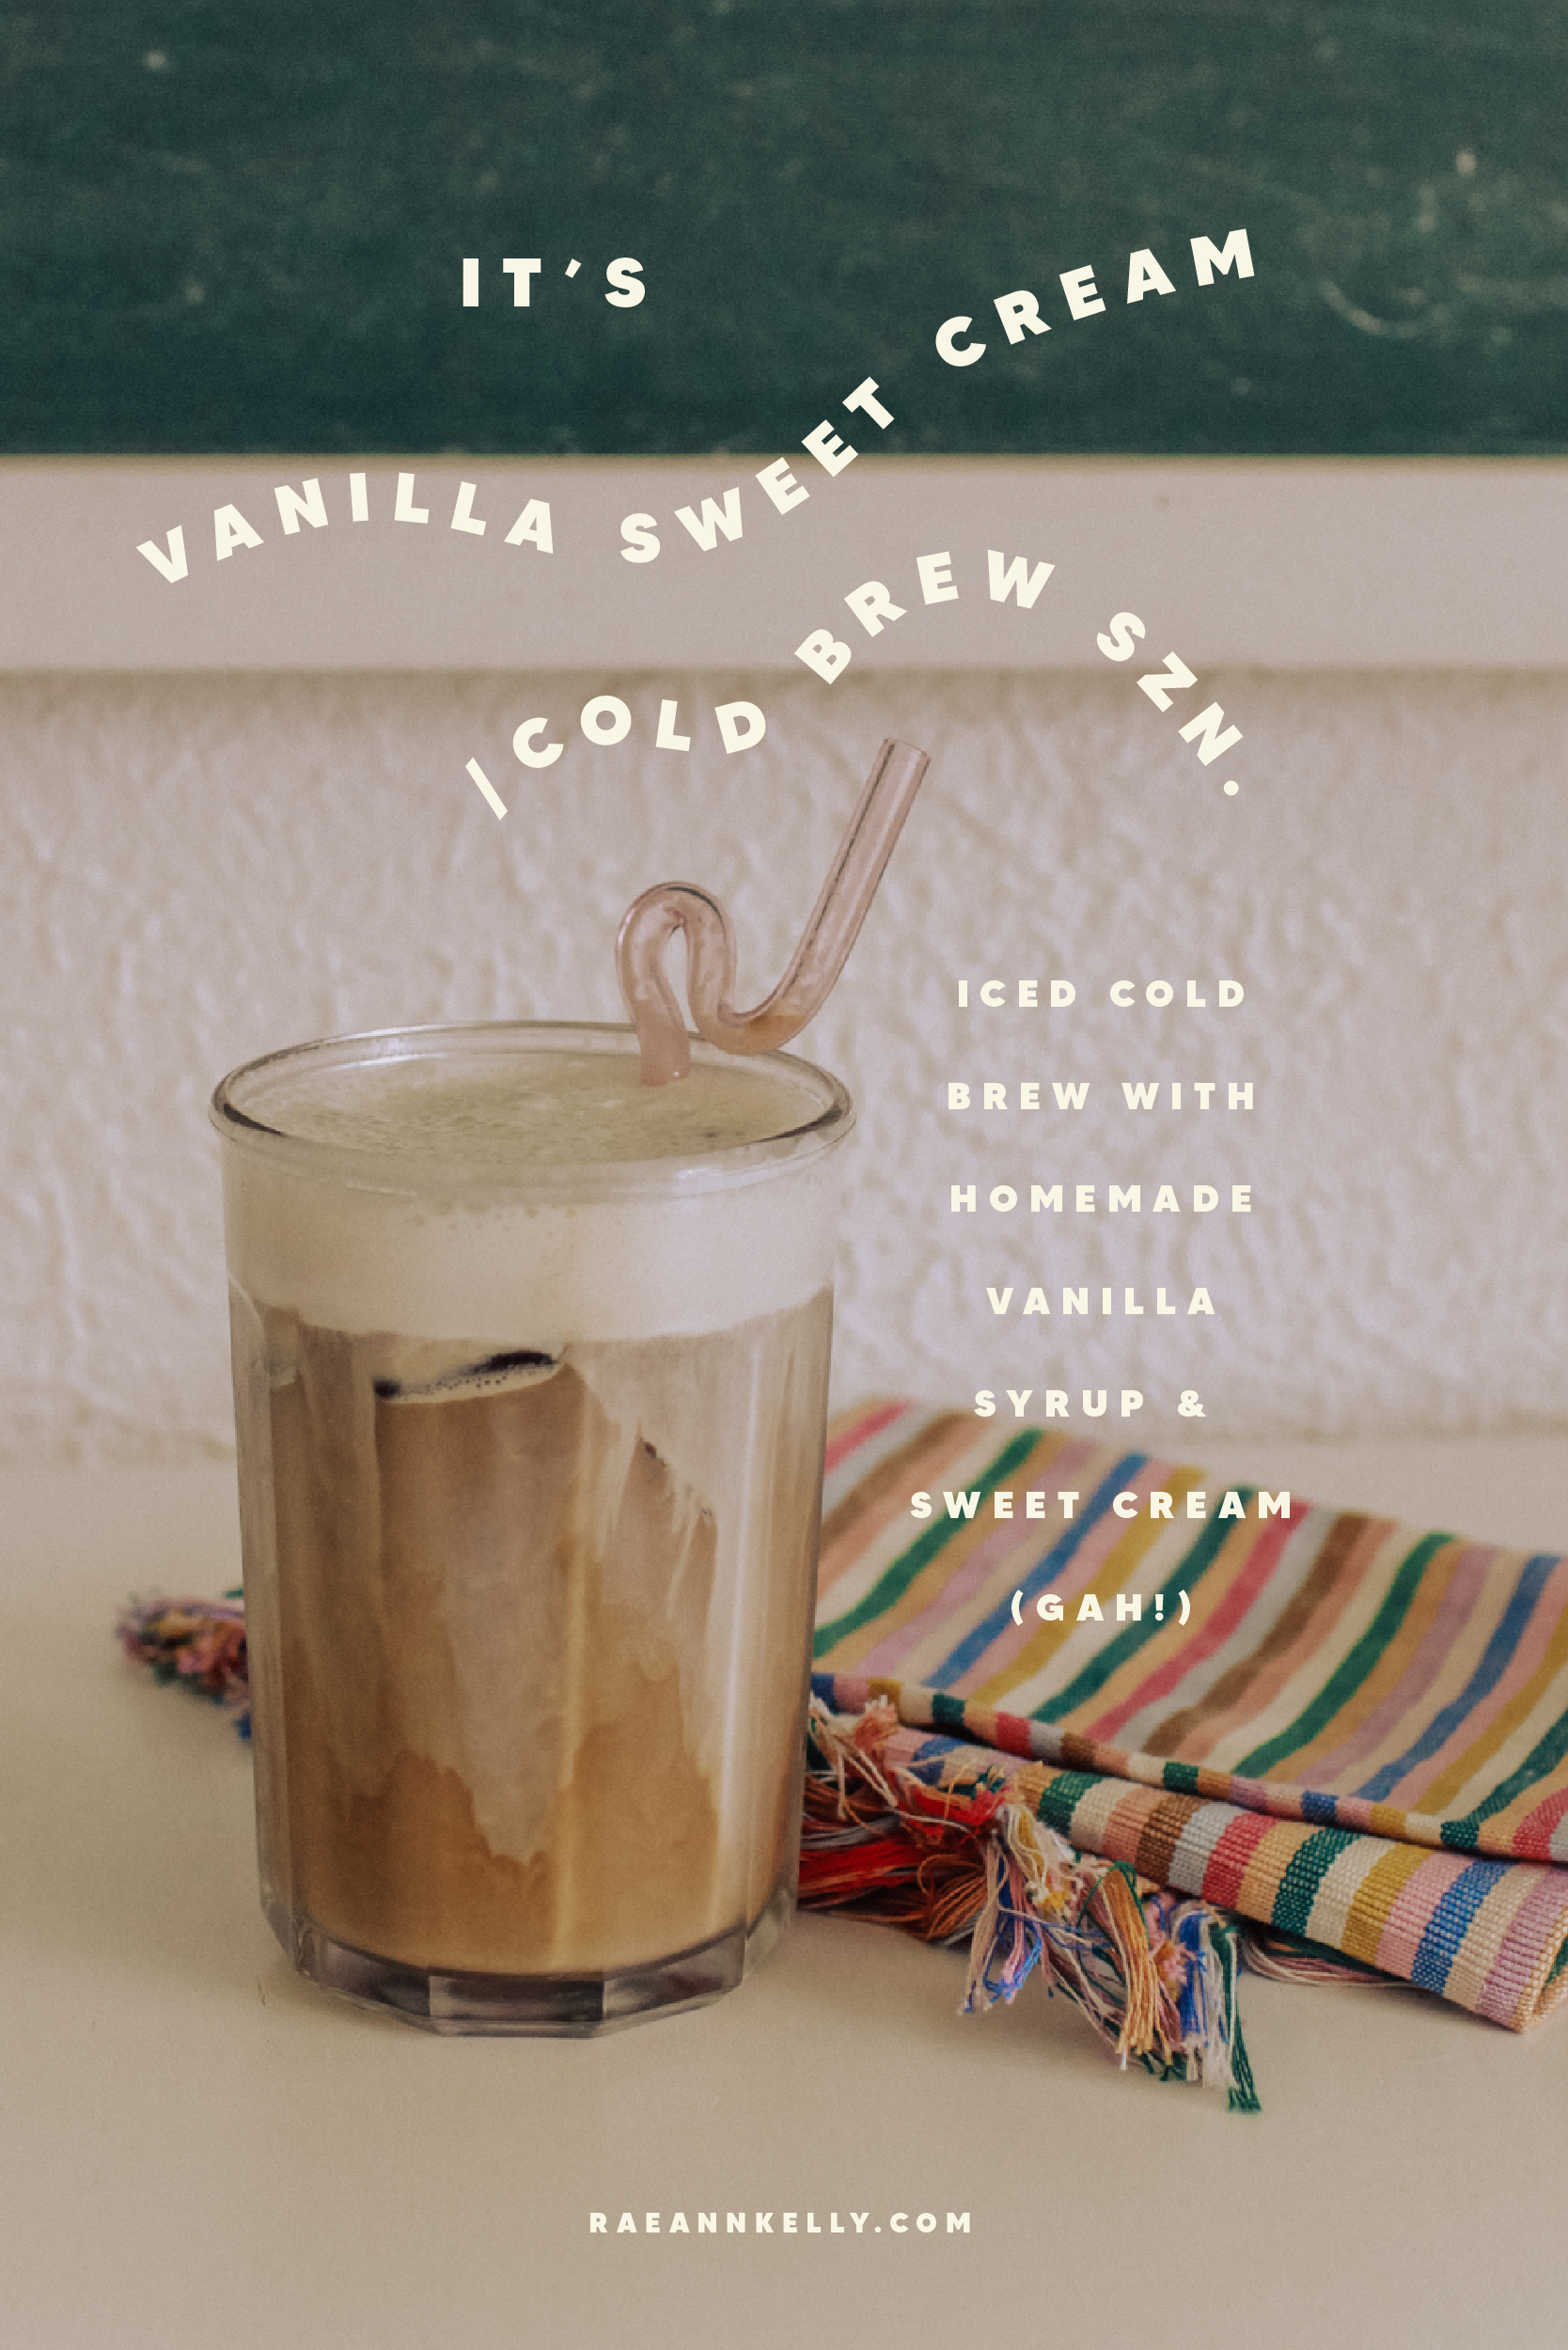 At-home coffee essentials for cold brew, lattes and more